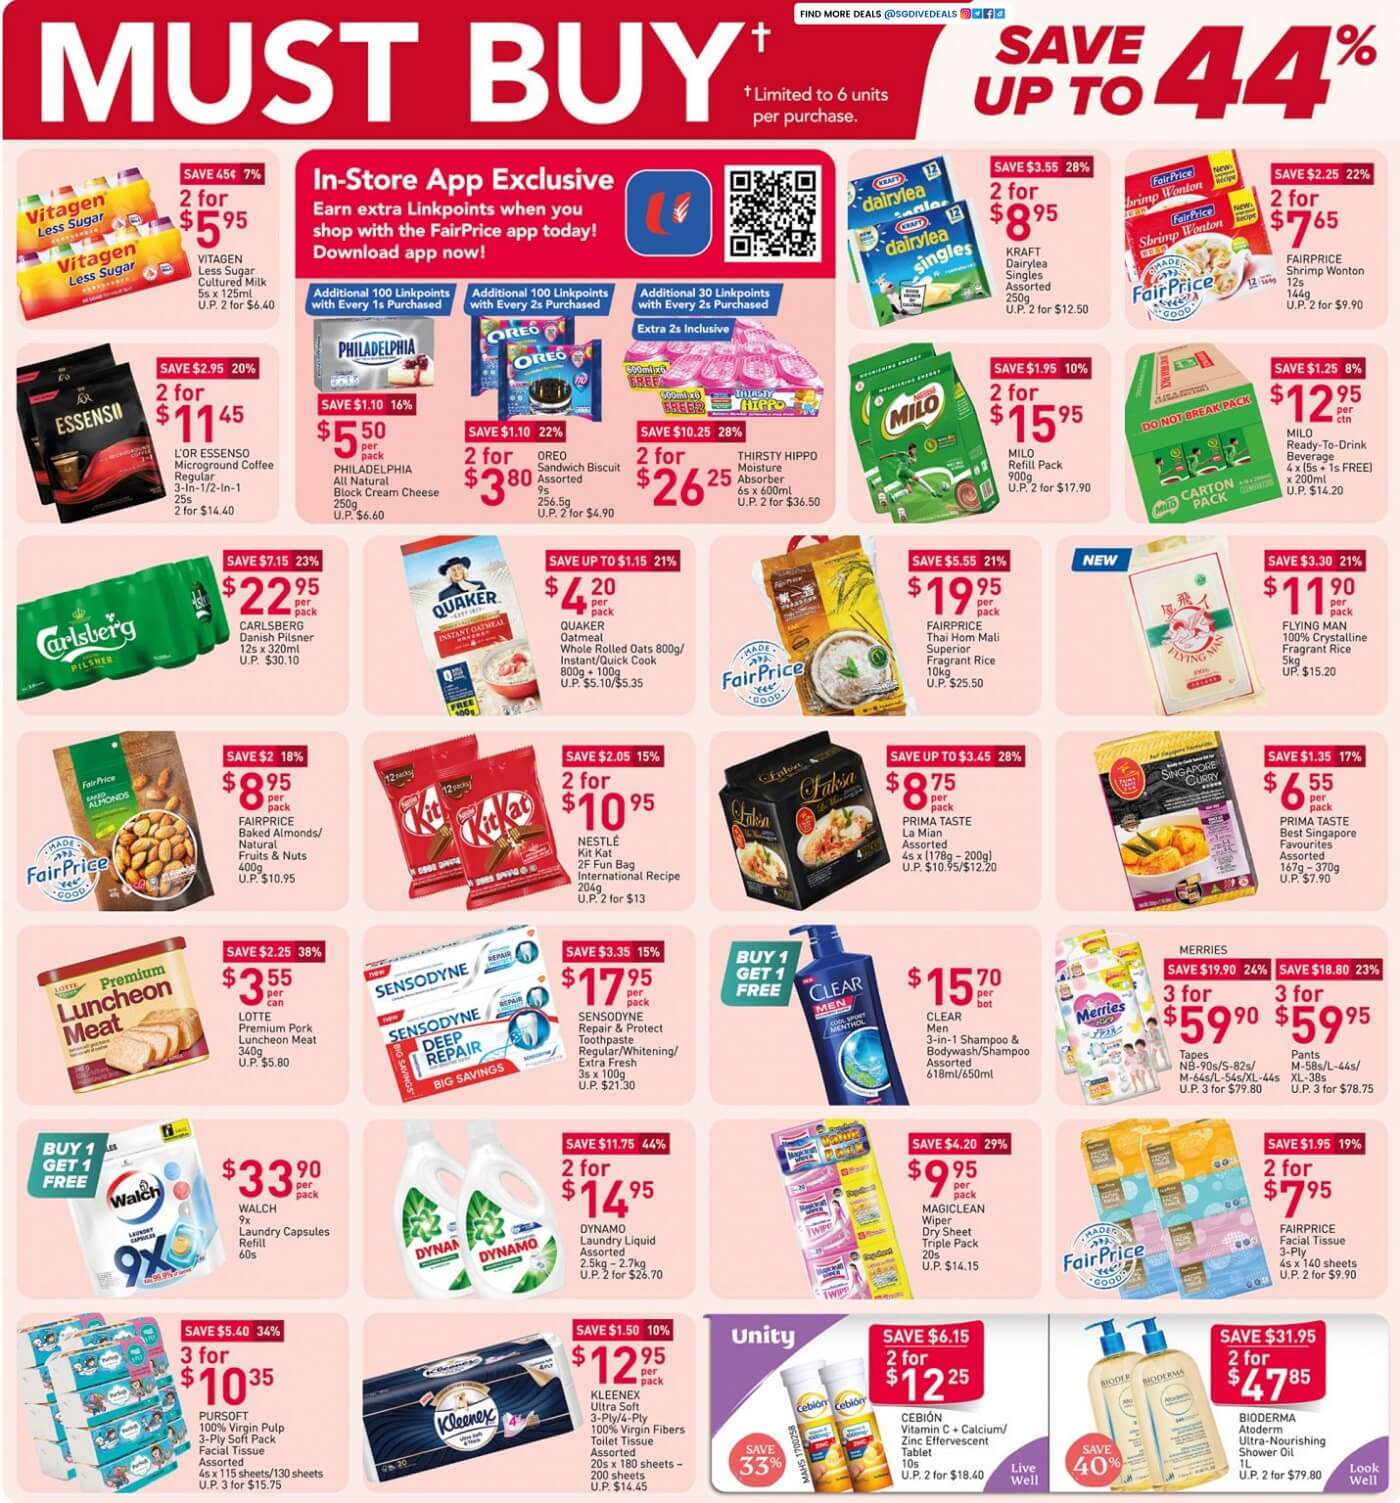 NTUC FairPrice,Weekly must buy save up to 44% off